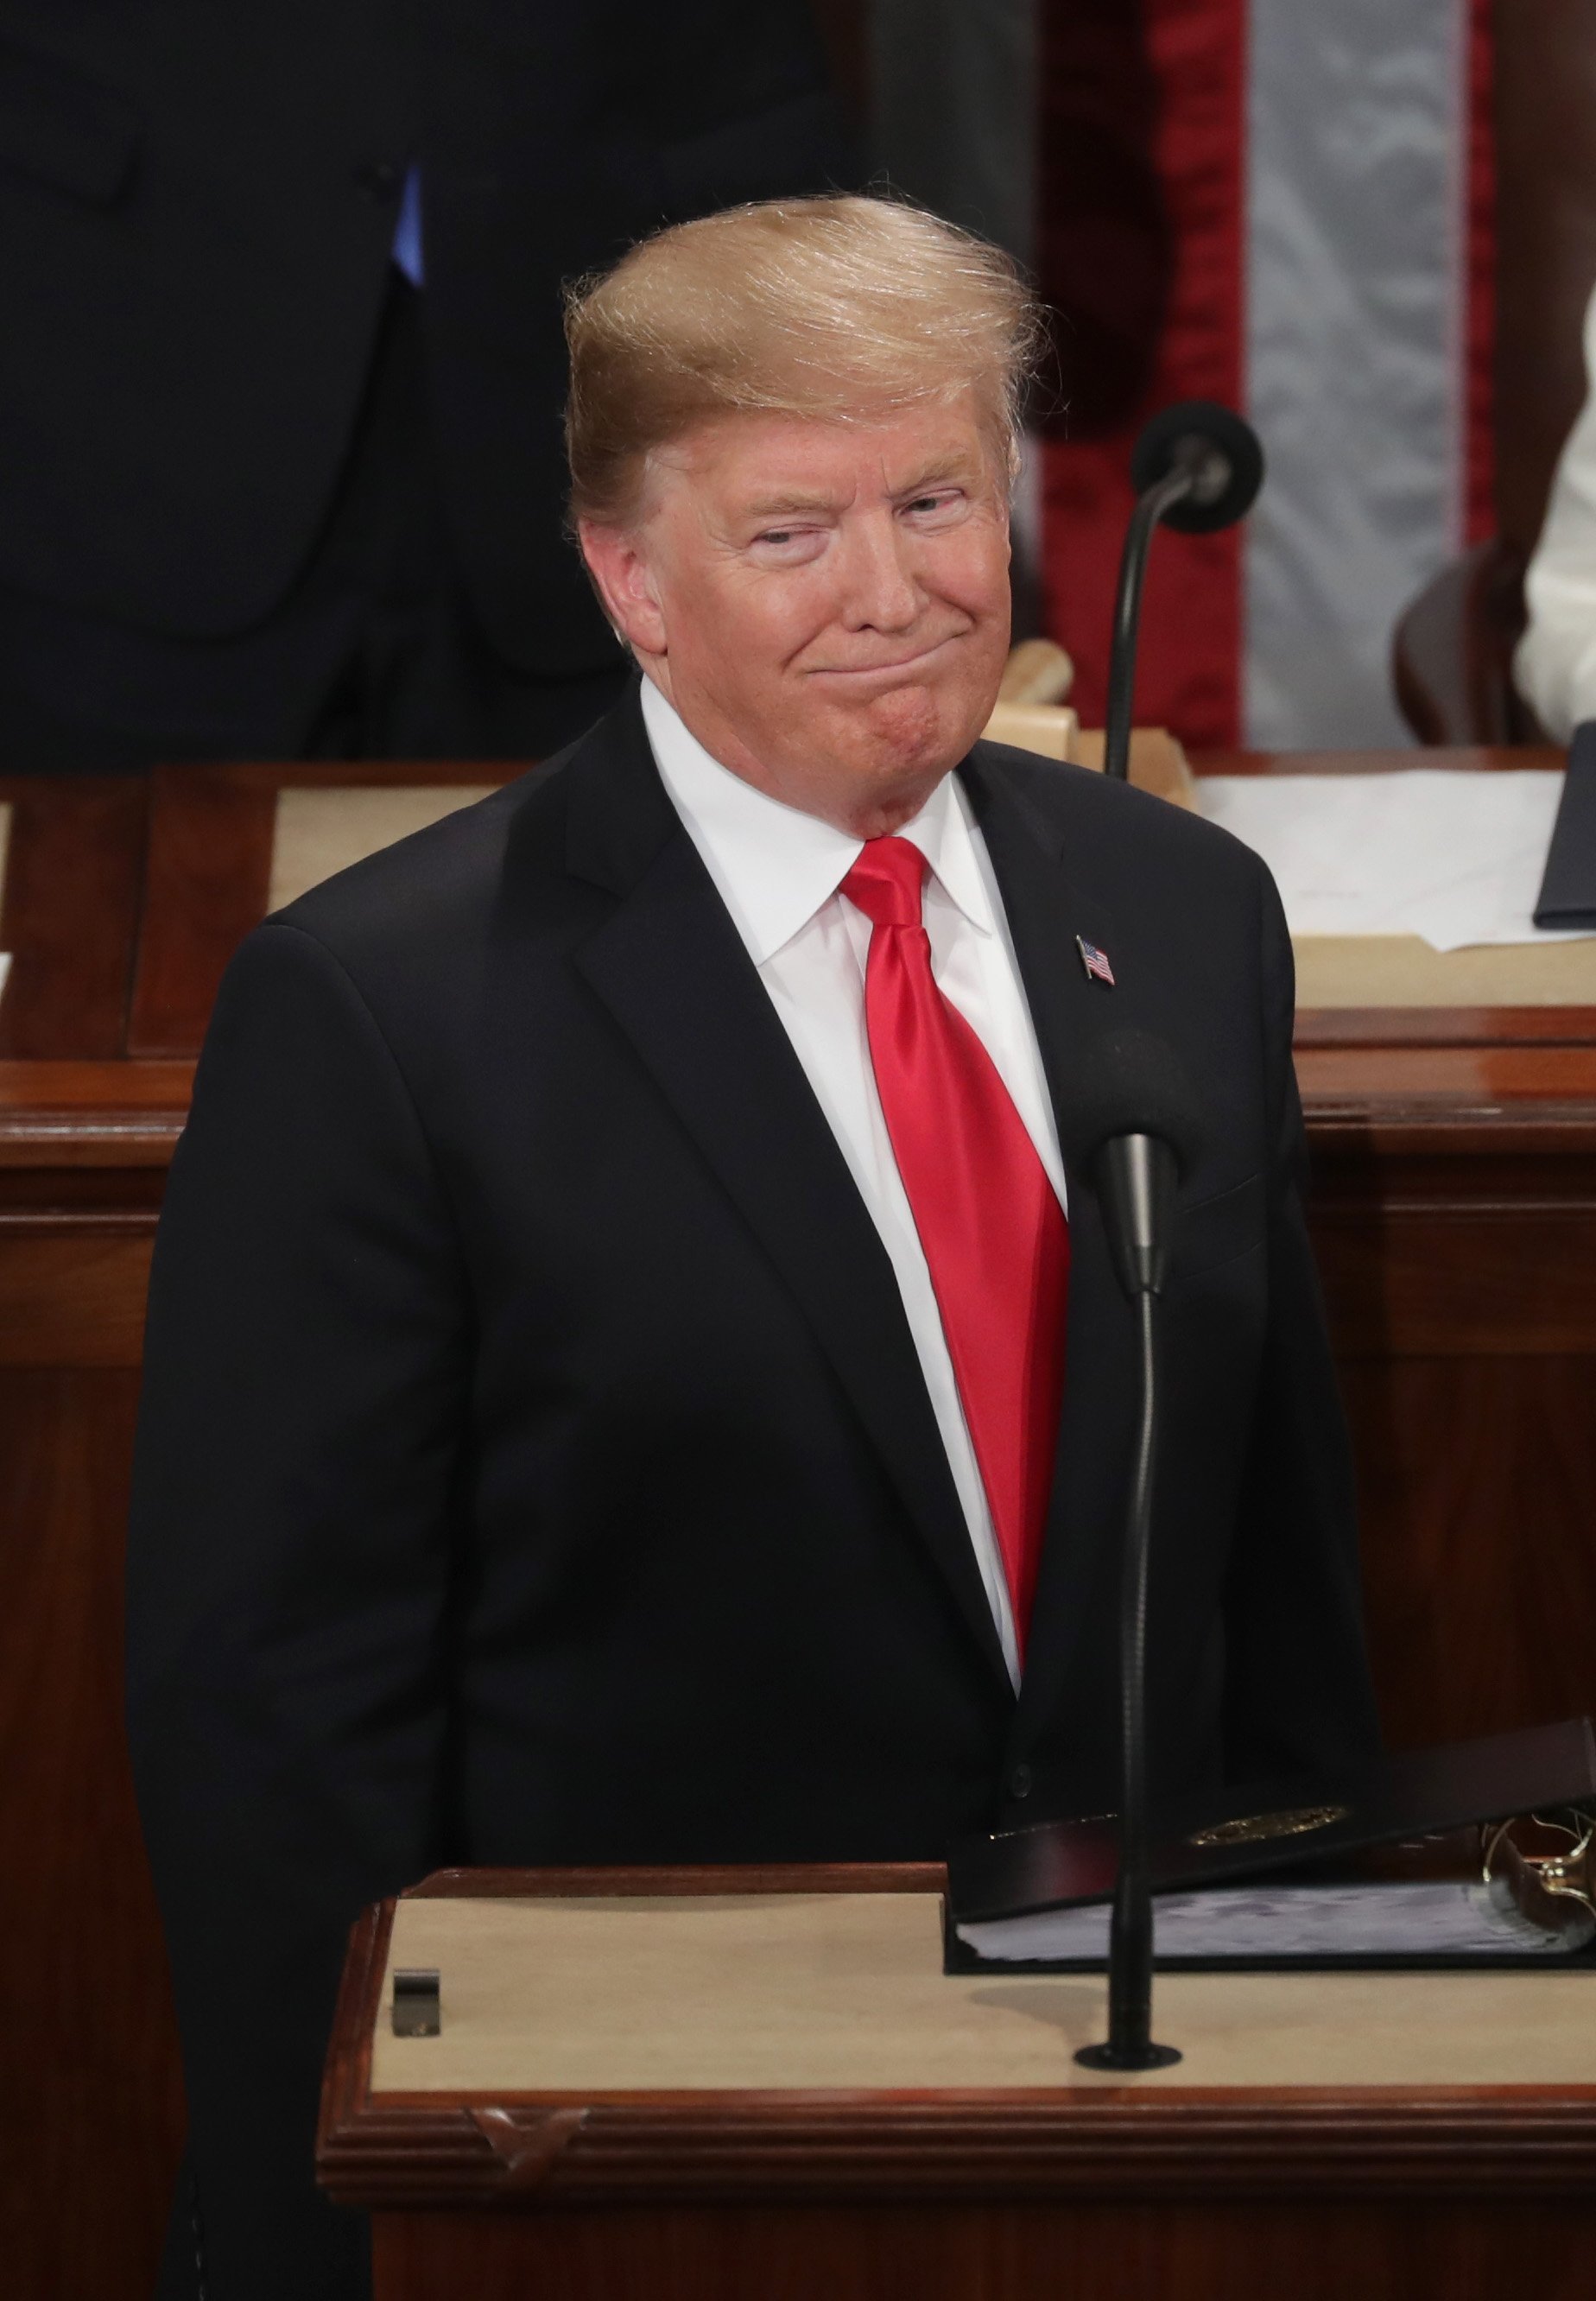 President Donald Trump at the House Chamber for the State of the Union address | Photo: Getty Images